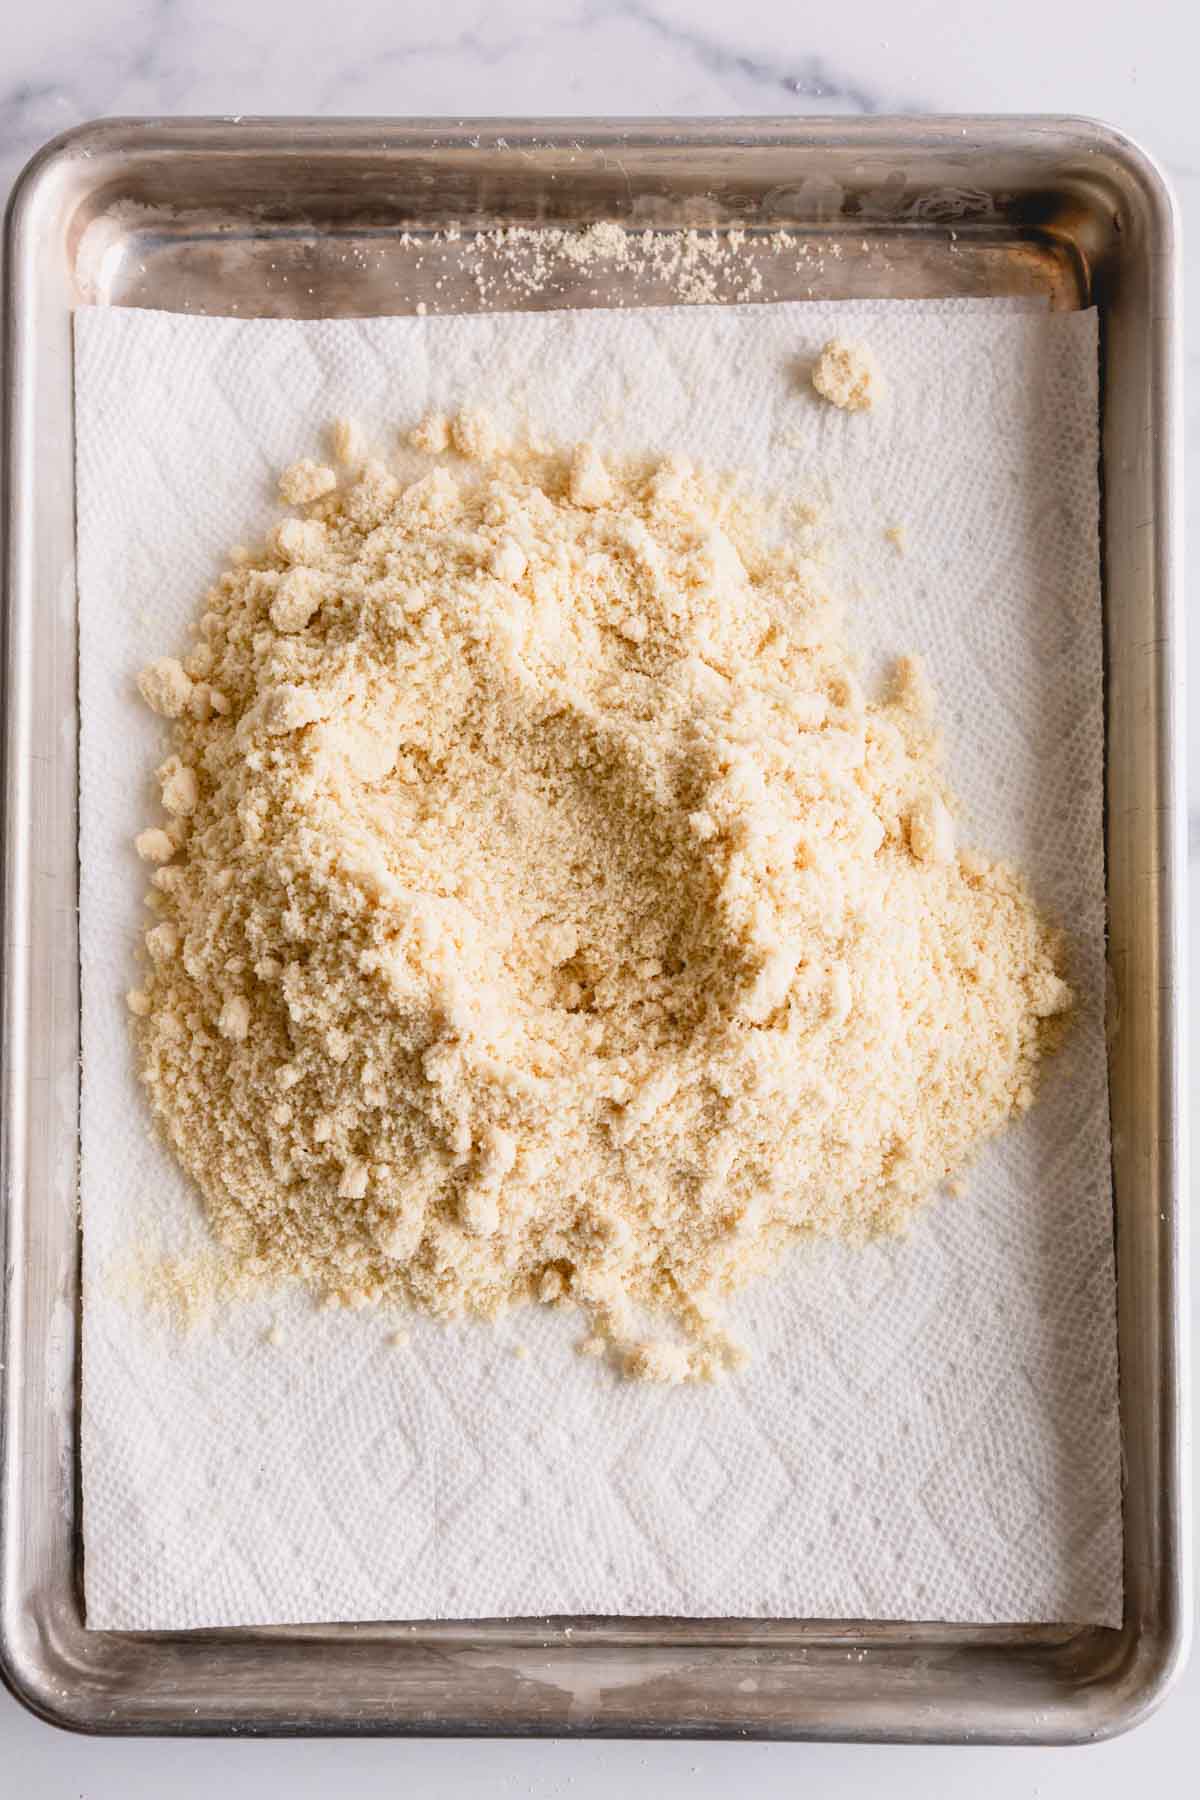 Almond flour on a baking sheet lined with paper towel.